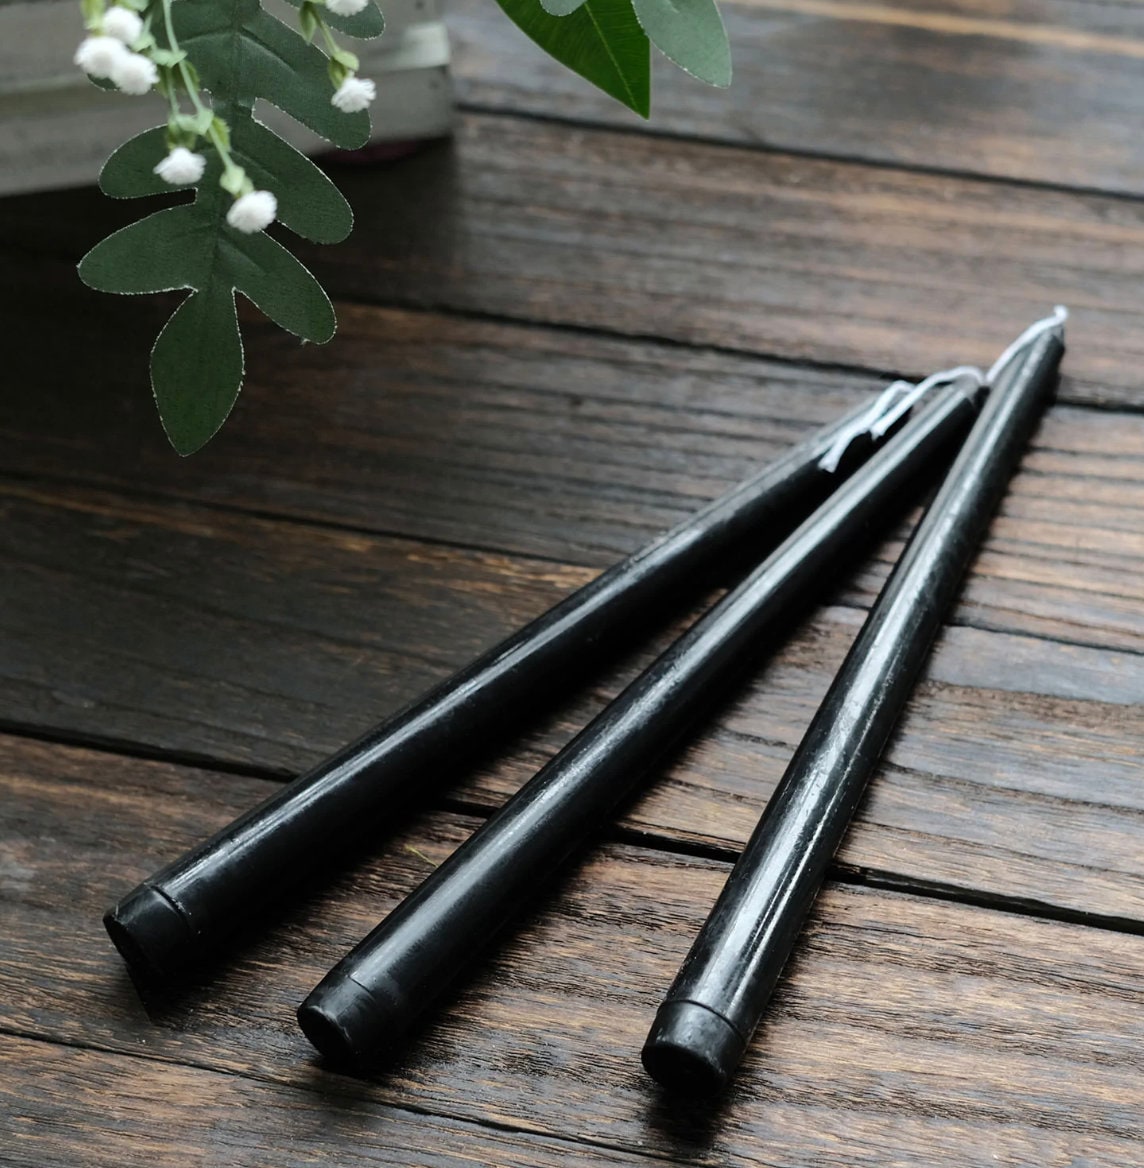 24 Smokeless Black Taper Candles Premium Long Wax Candles Unscented Romantic Wedding Minimal Wholesale Sale Decoration Dripless Gothic